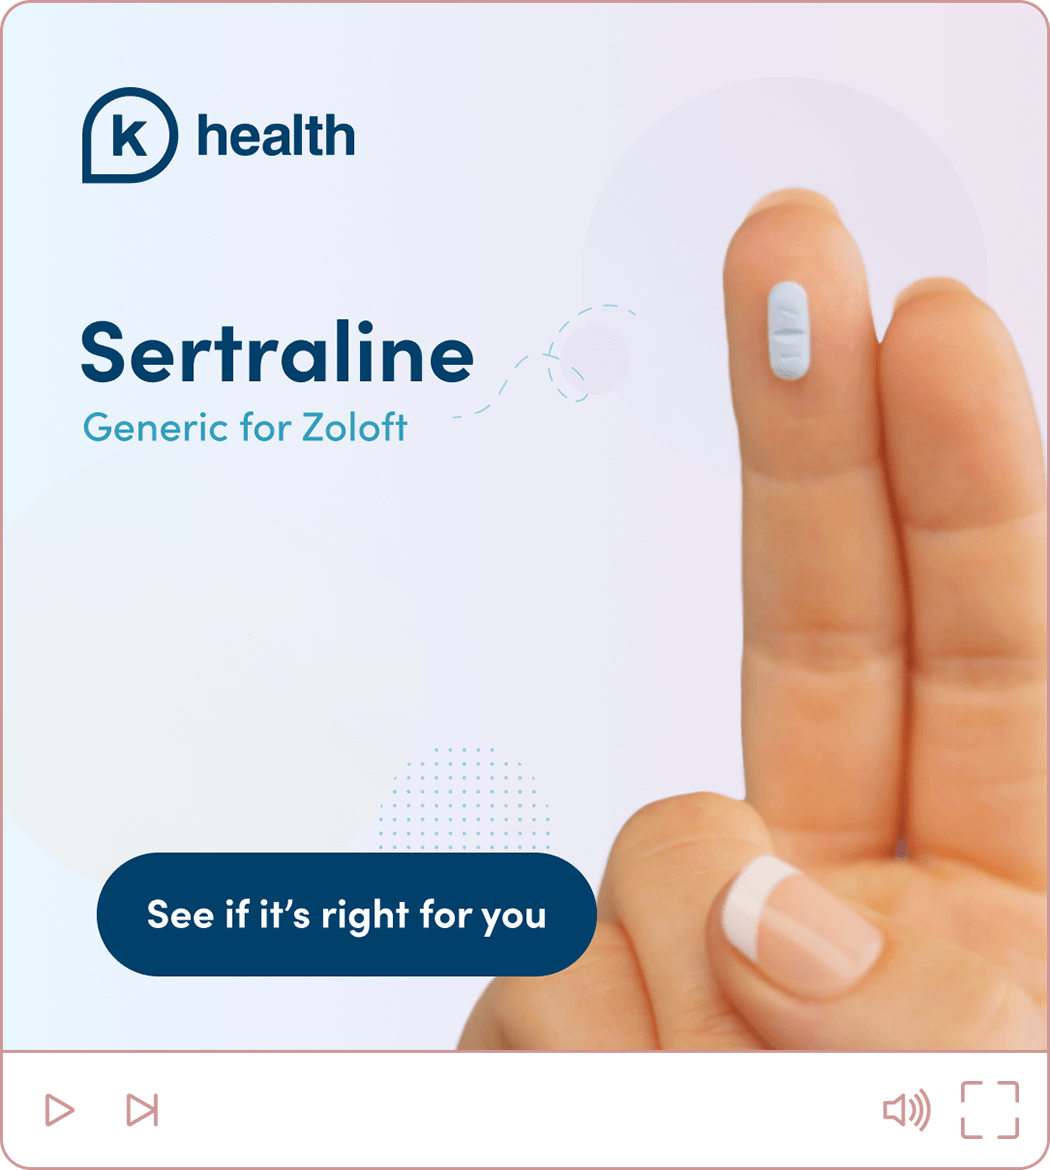 Ad for 50mg of sertraline featuring a hand holding a pill, the medication name, and the K Health logo